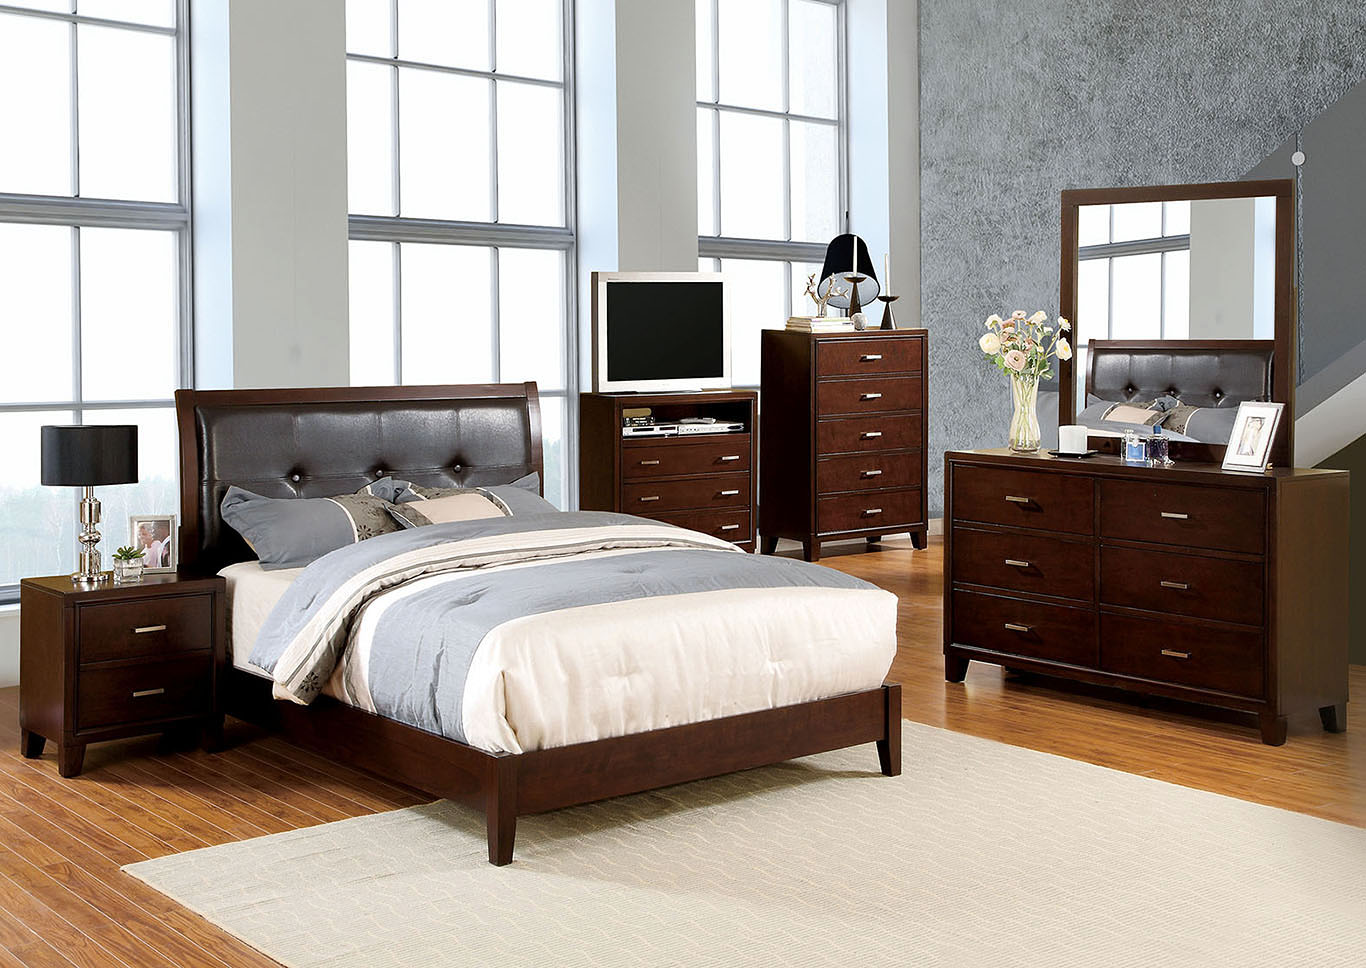 Enrico l Brown Queen Platform Bed w/Dresser and Mirror,Furniture of America